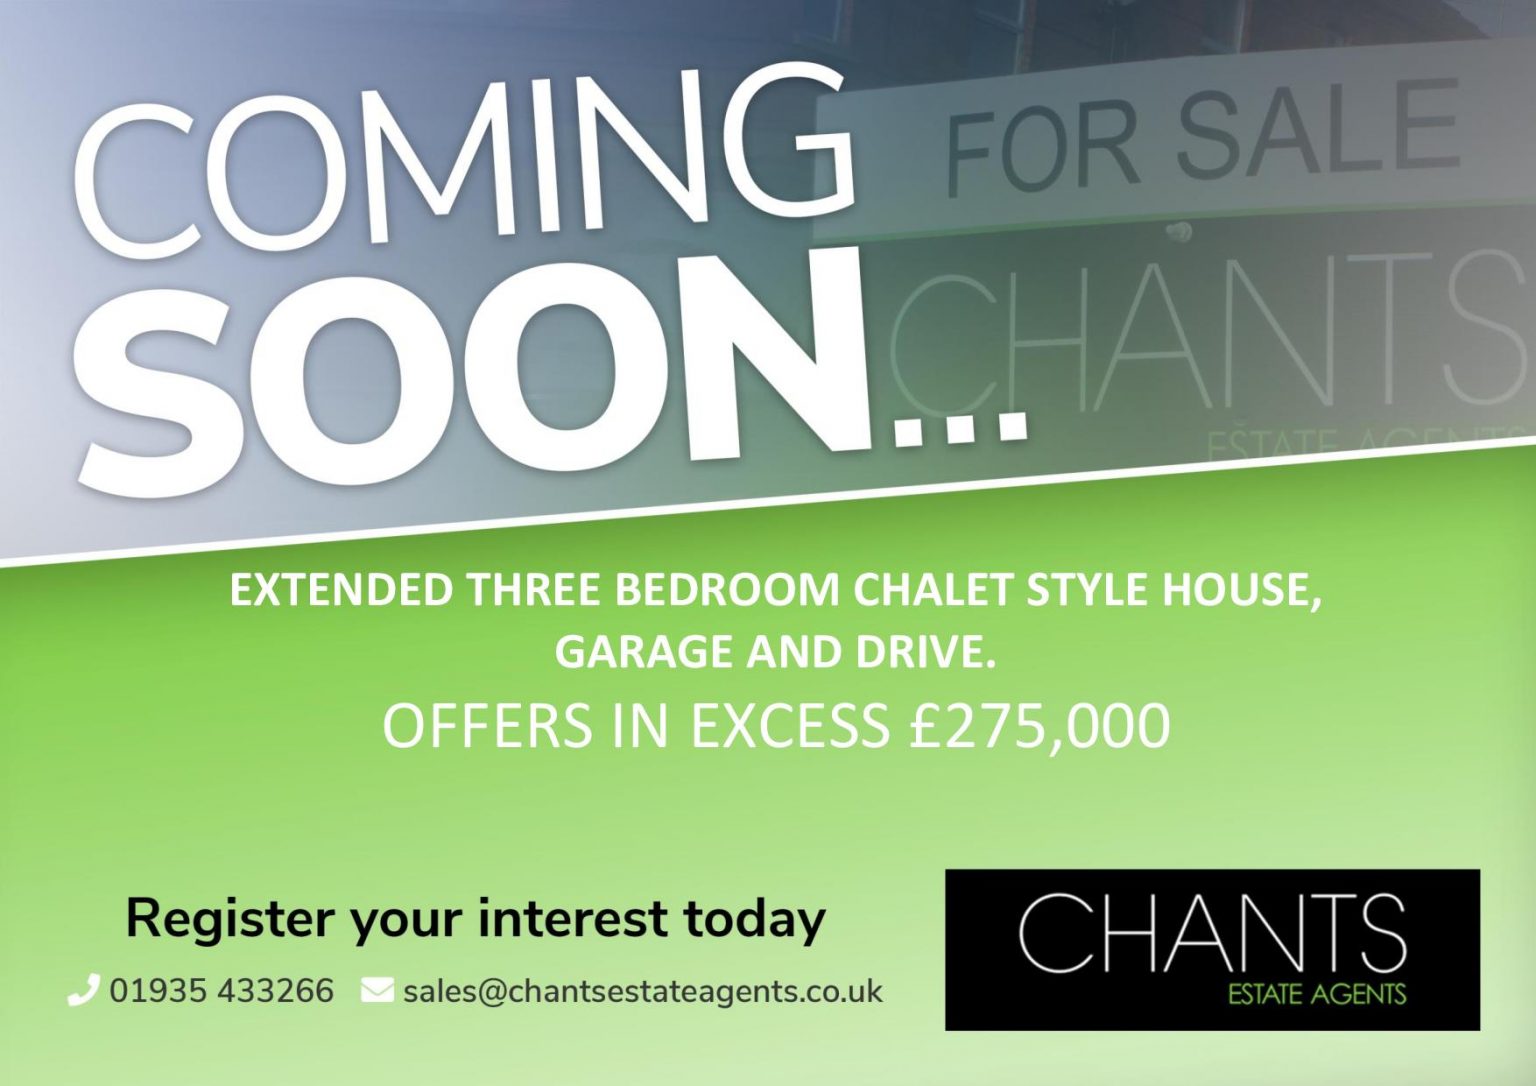 NEW PROPERTY COMING SOON! Independent Estate Agents